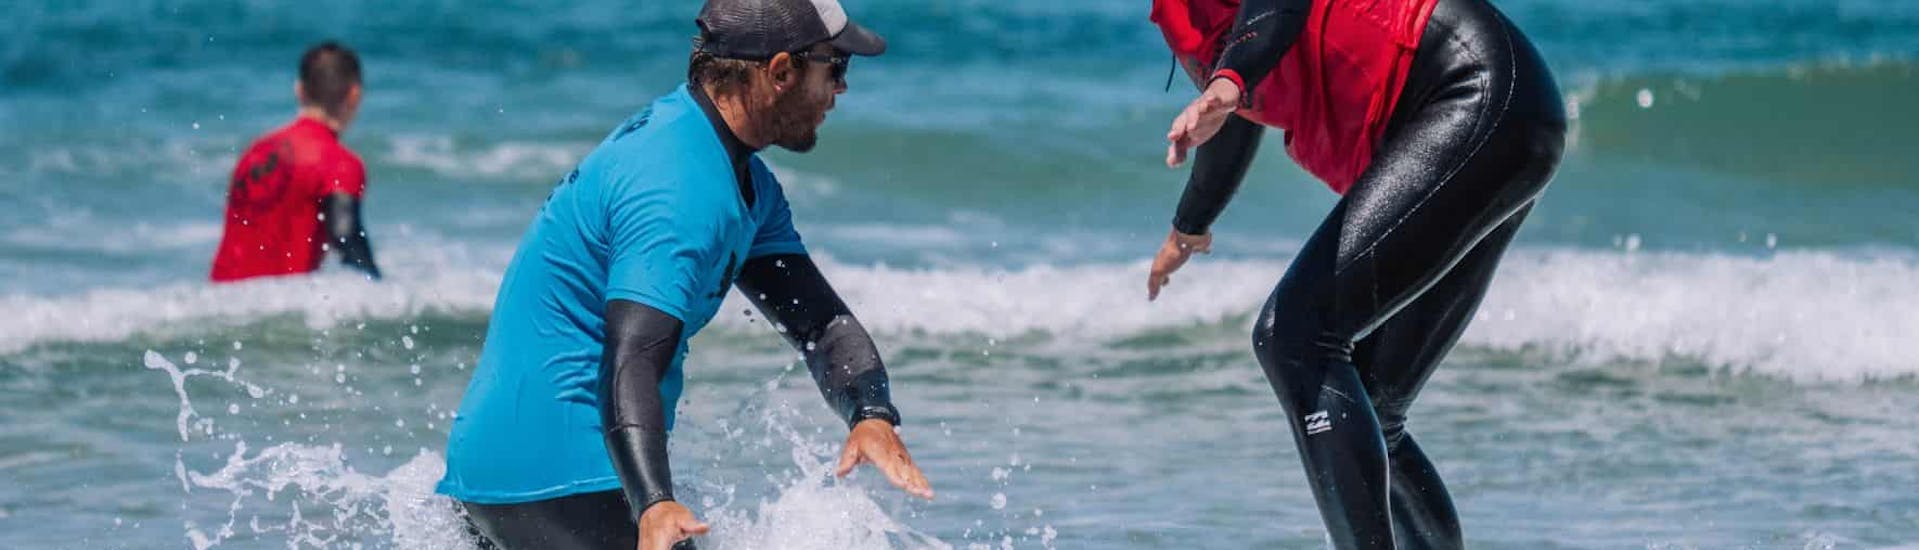 Someone who attends surfing lessons from 7 years in Lagos organised by Algarve Watersports.